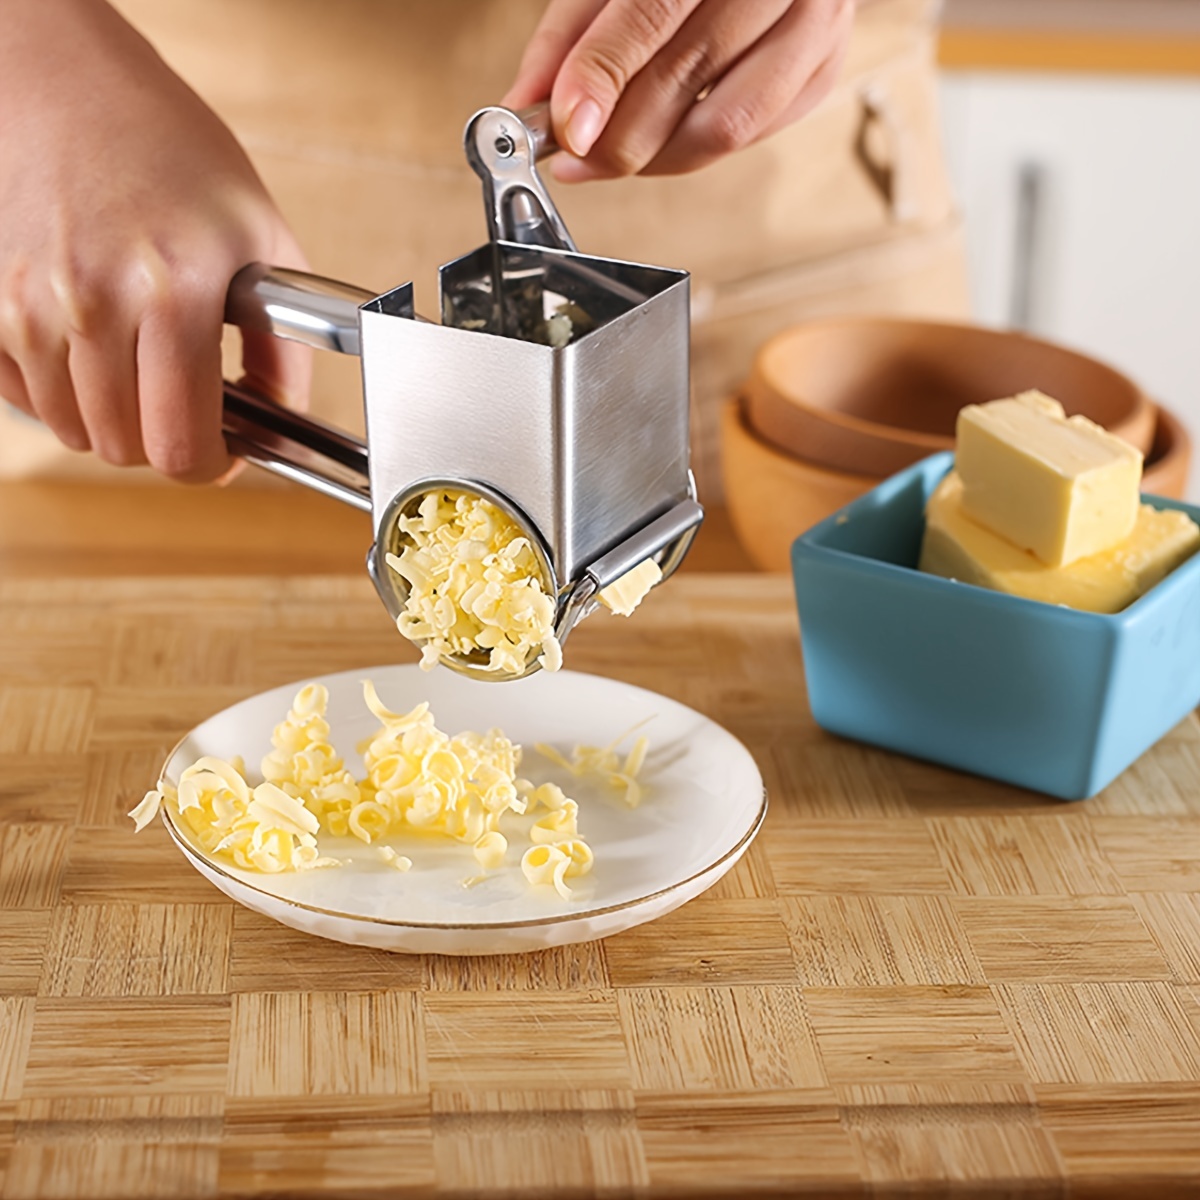 Cheese Grater With Handle, Kitchen Parmesan Cheese Grater, Rotary